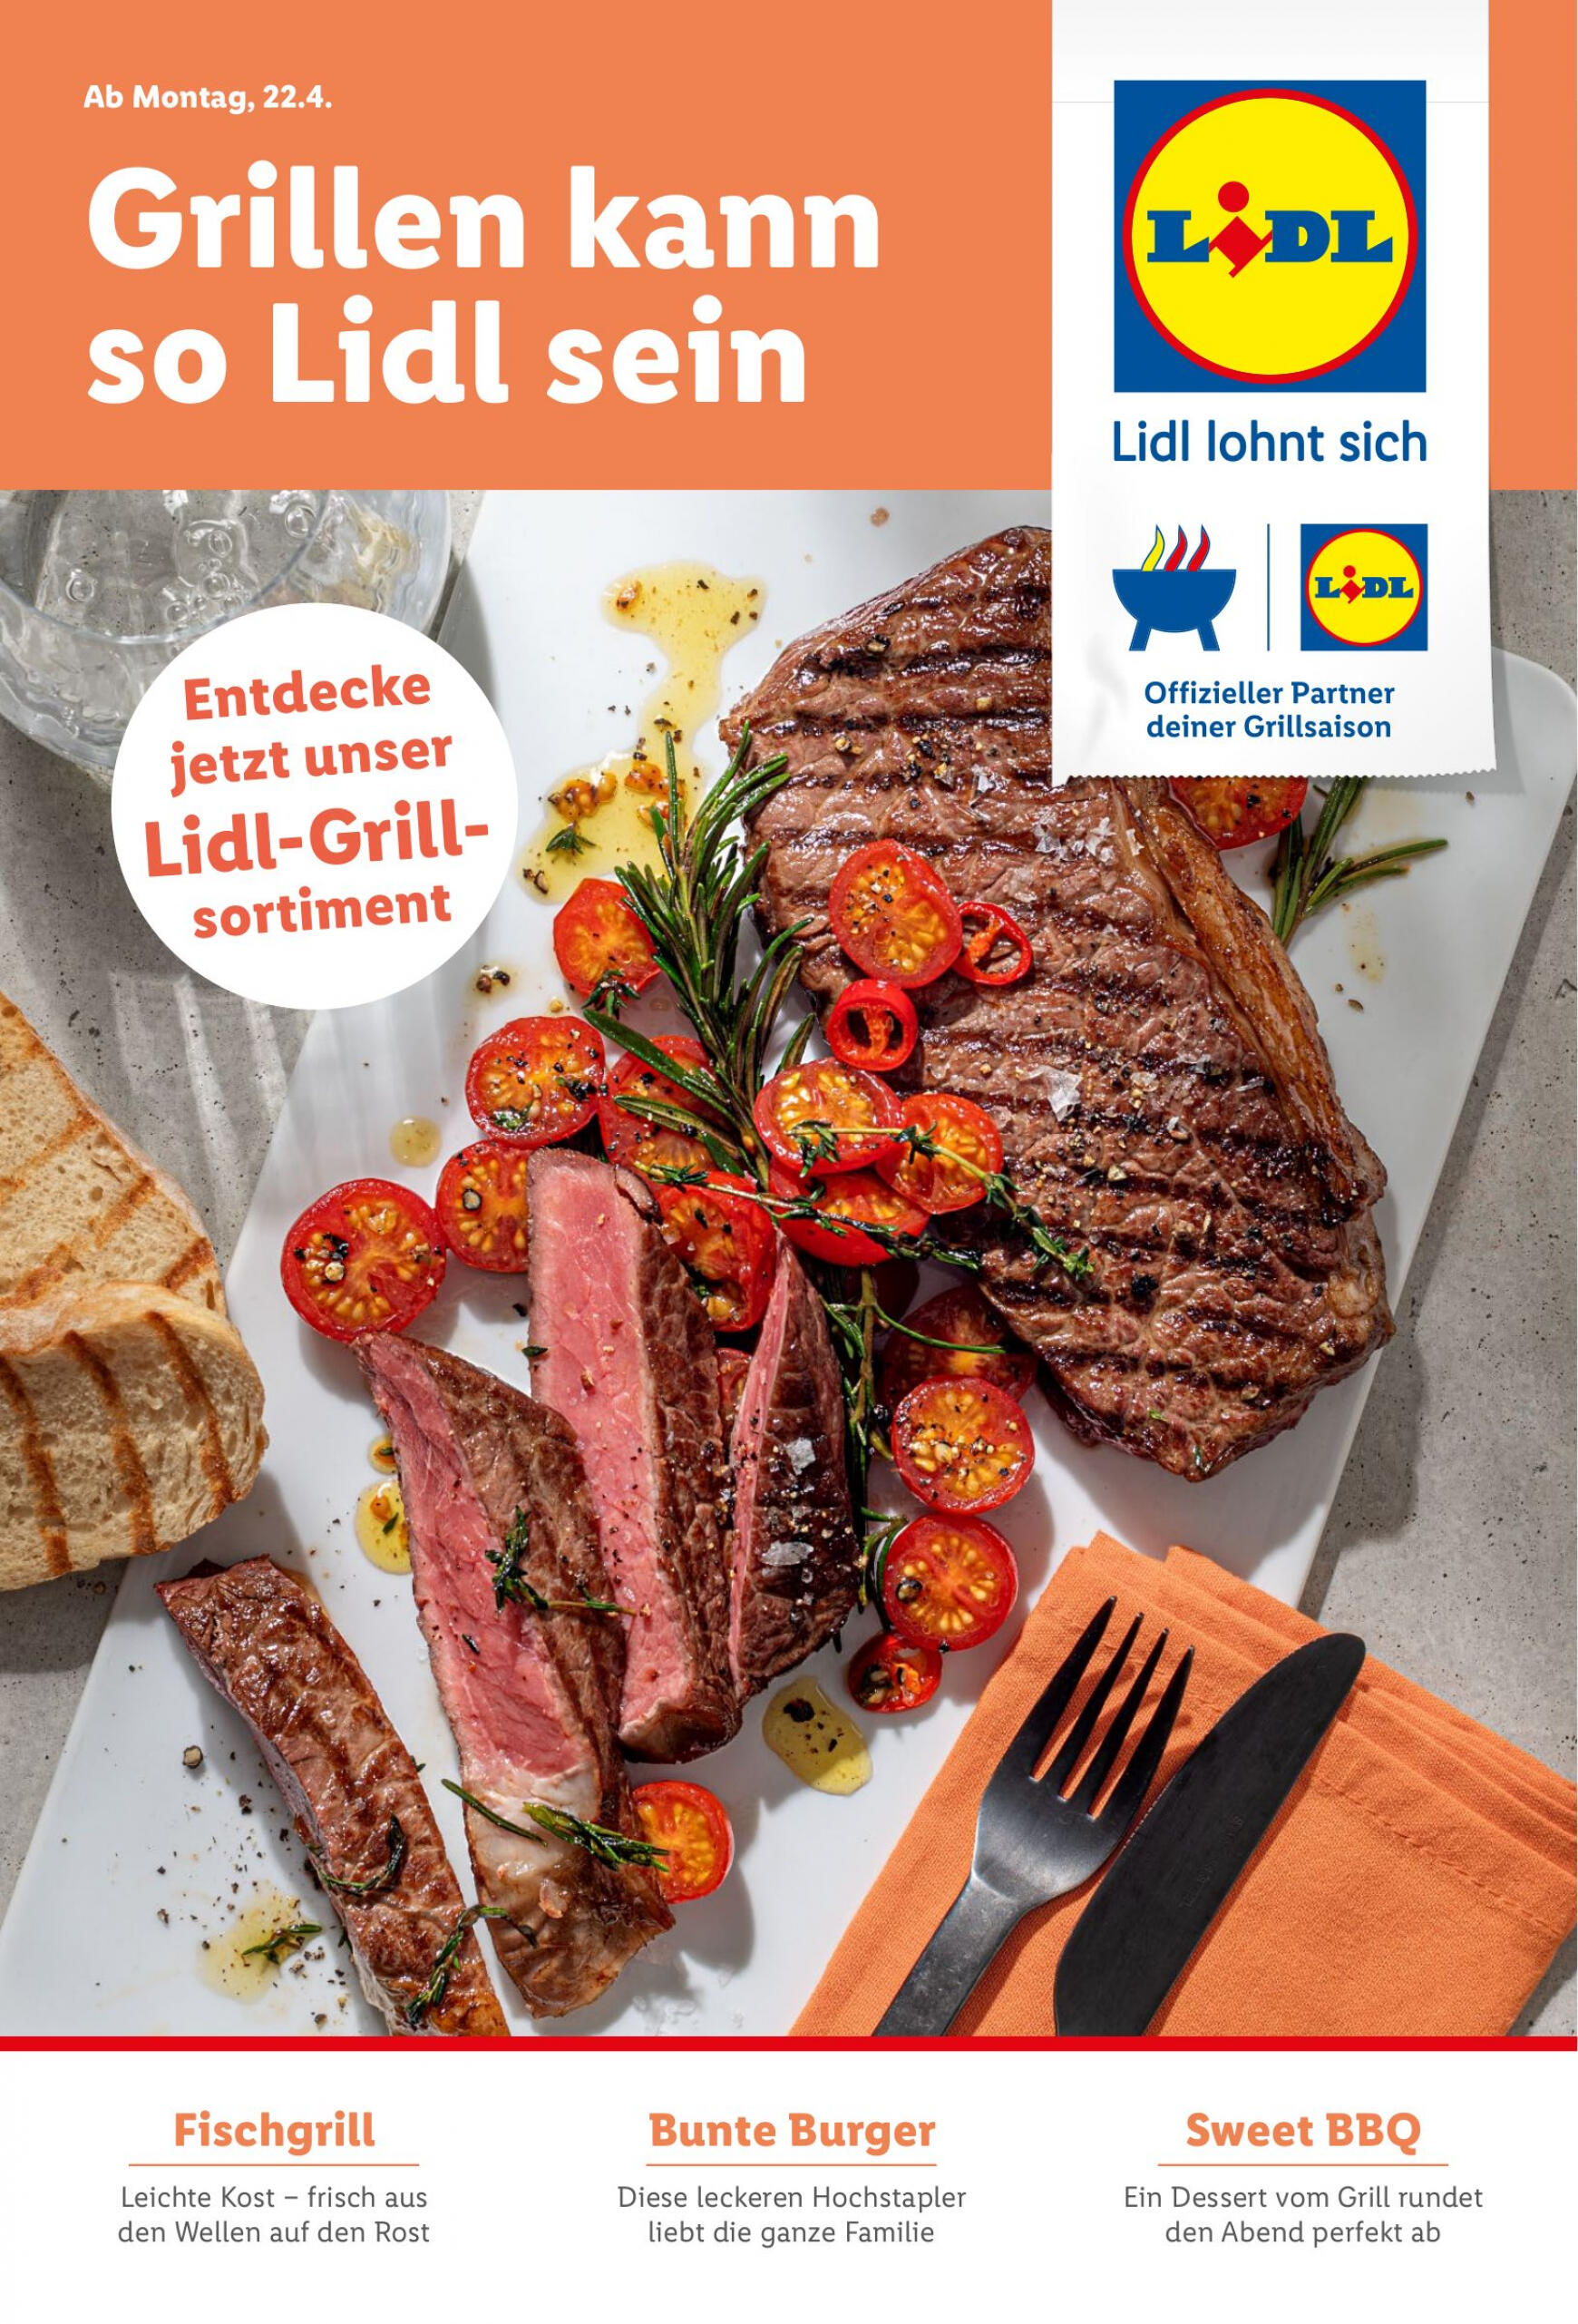 lidl - Flyer Lidl - Grillmagazin aktuell 22.04. - 30.06. - page: 1